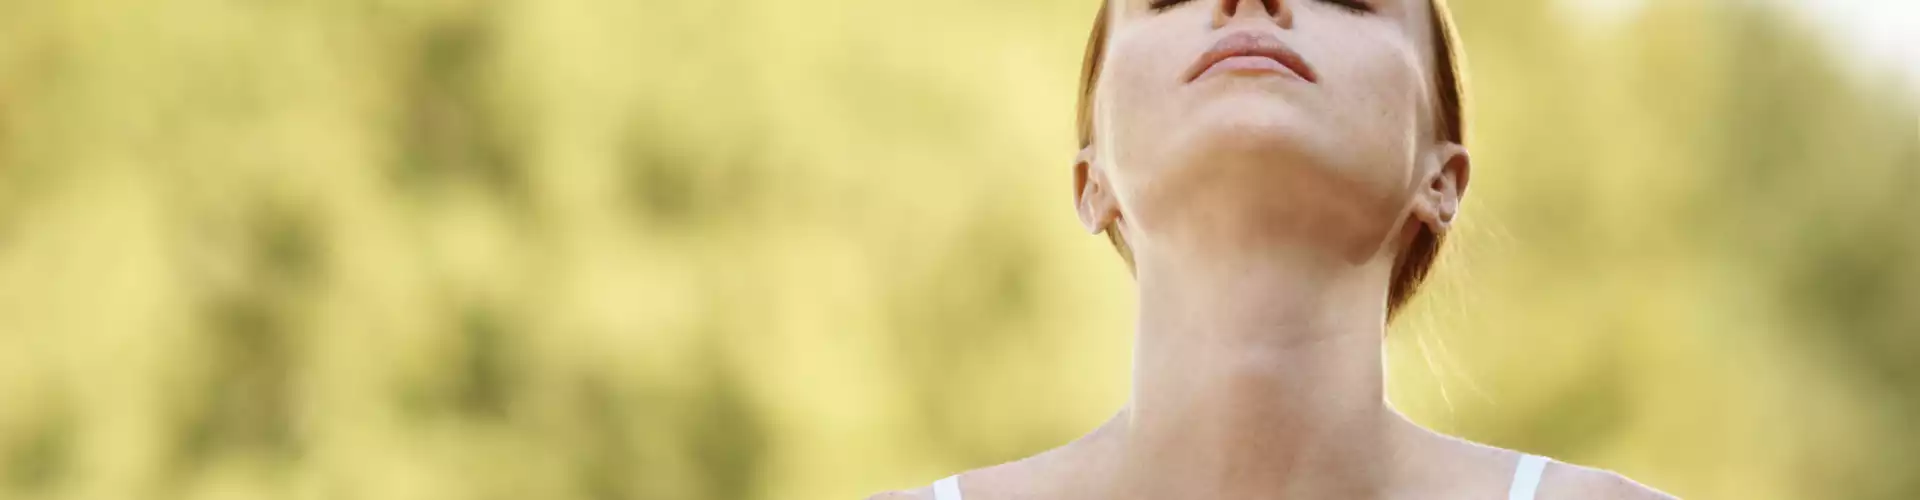 Stress Reduction with Deep Breathing Exercises